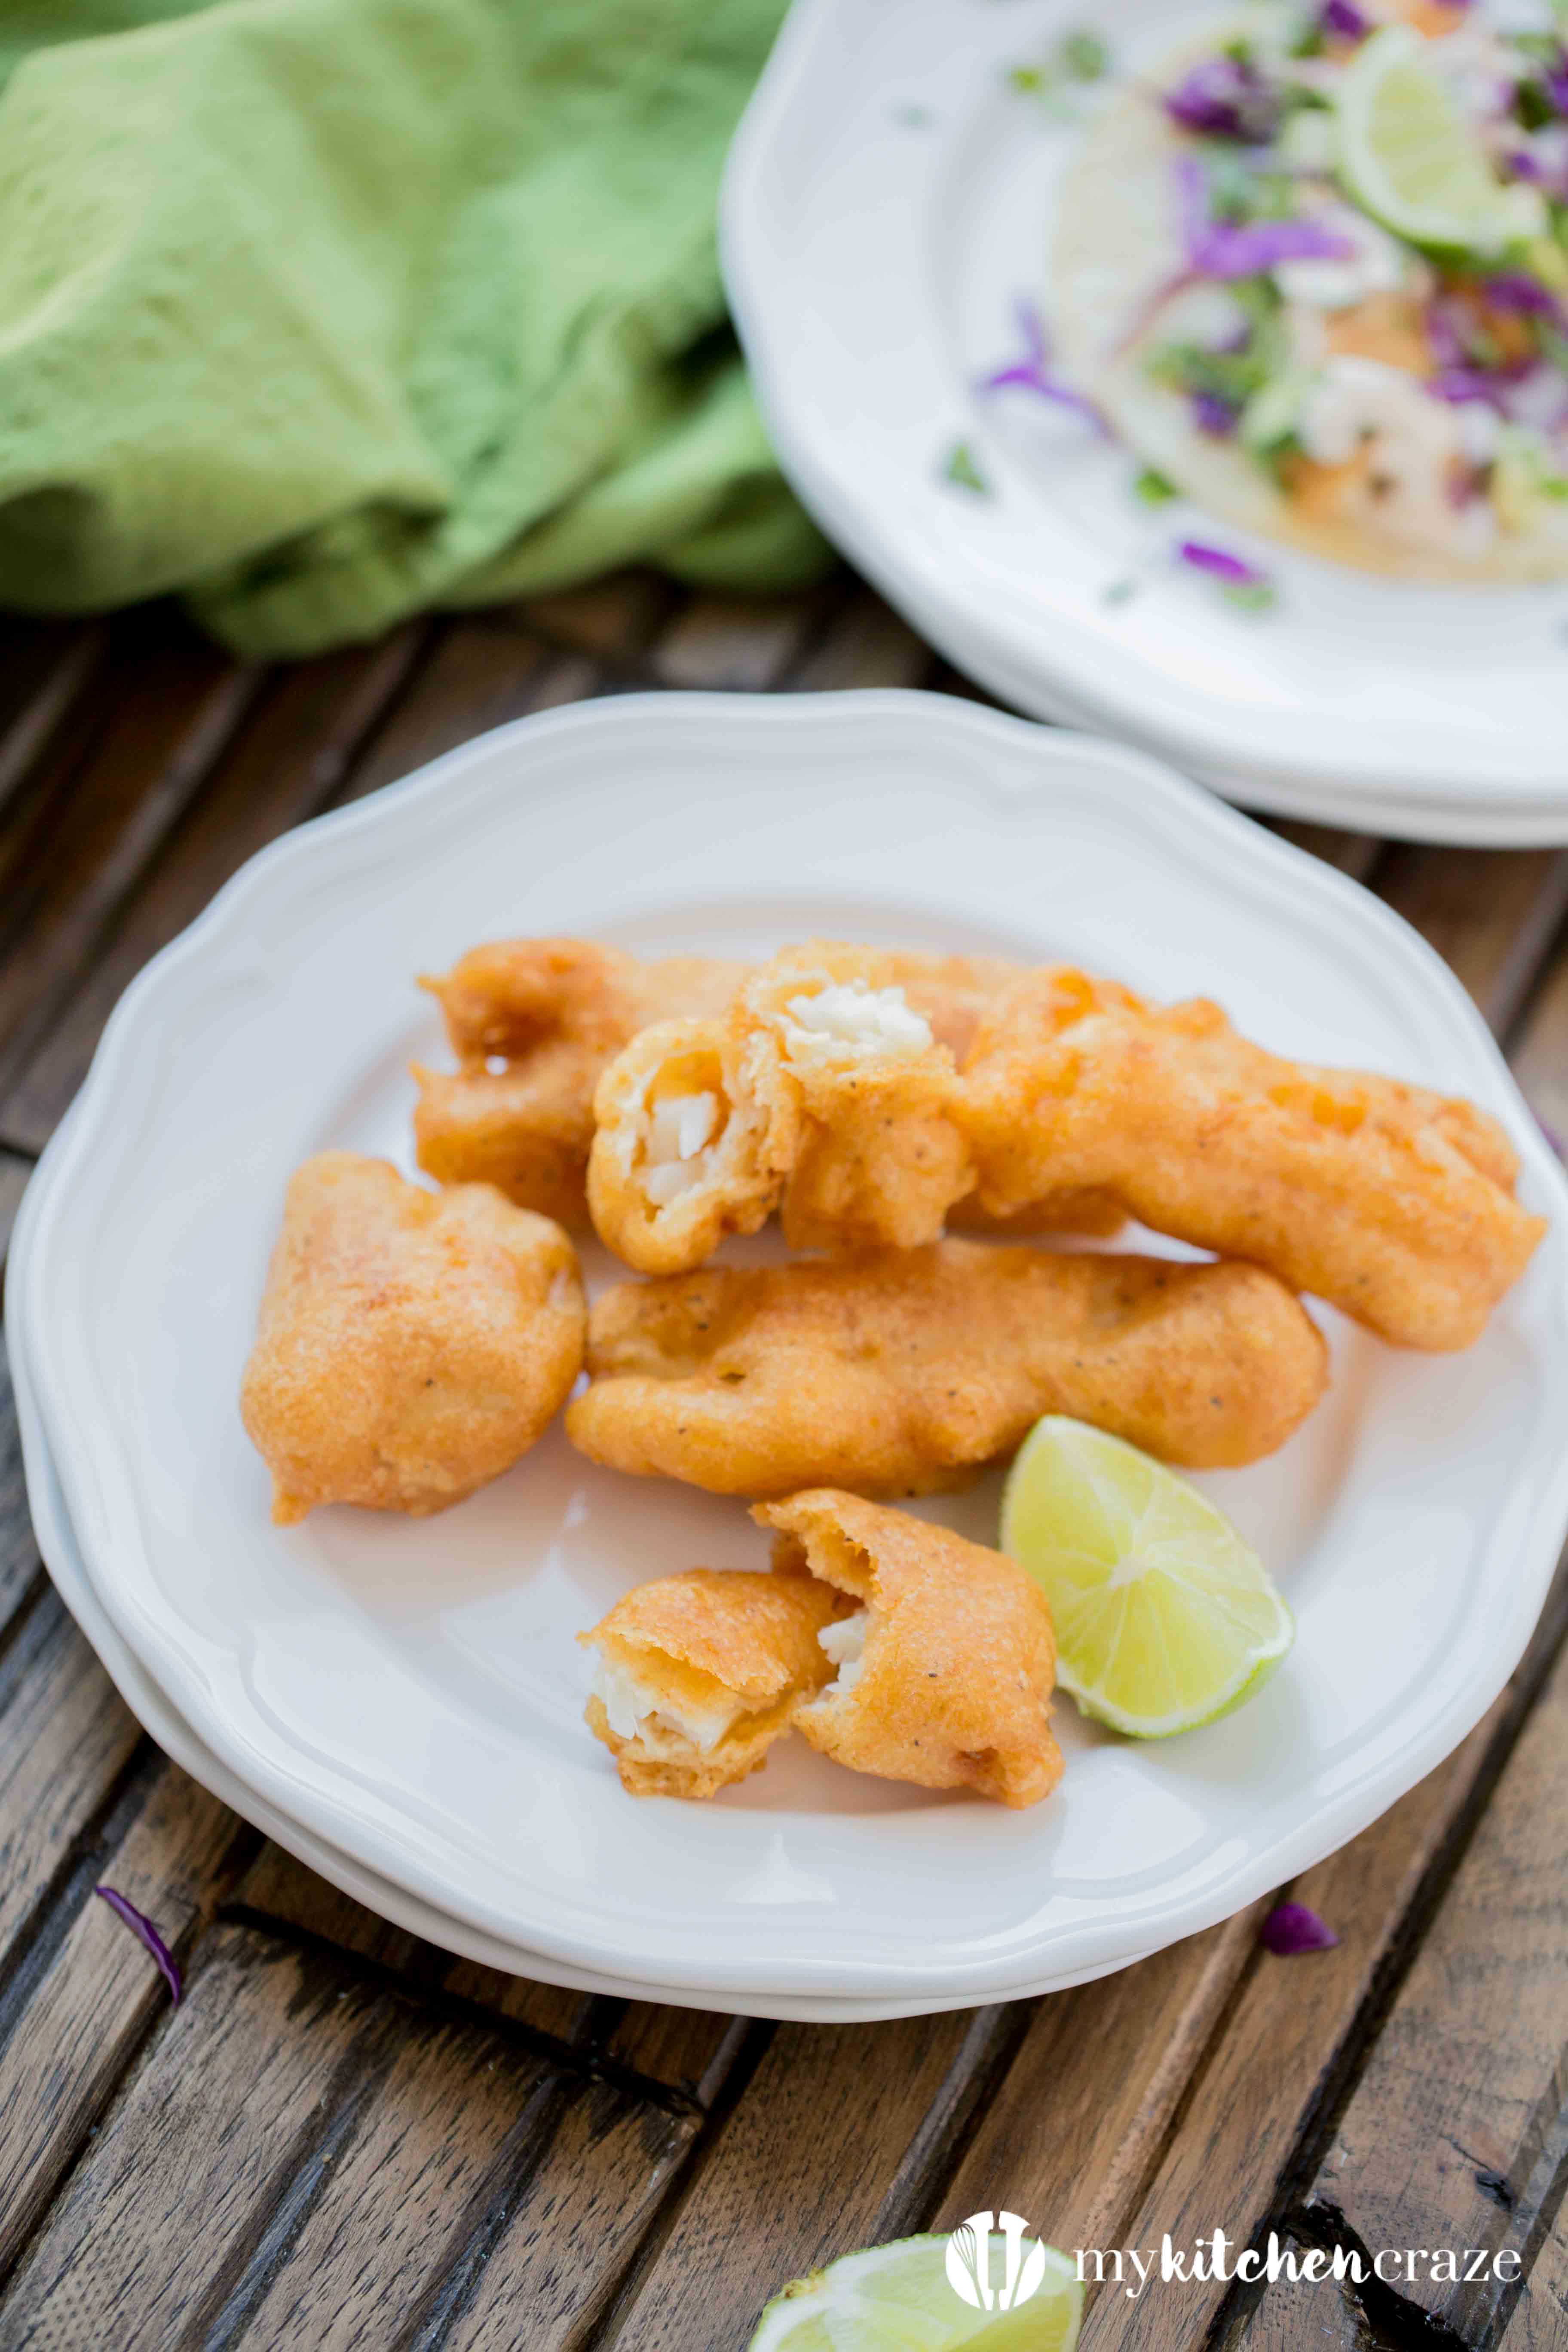 Do you love fish tacos, but have to go out to enjoy them? Well not anymore. These Beer Battered Fish Tacos are not only delicious, but easy to make in the comfort of your own home. Let me show you!